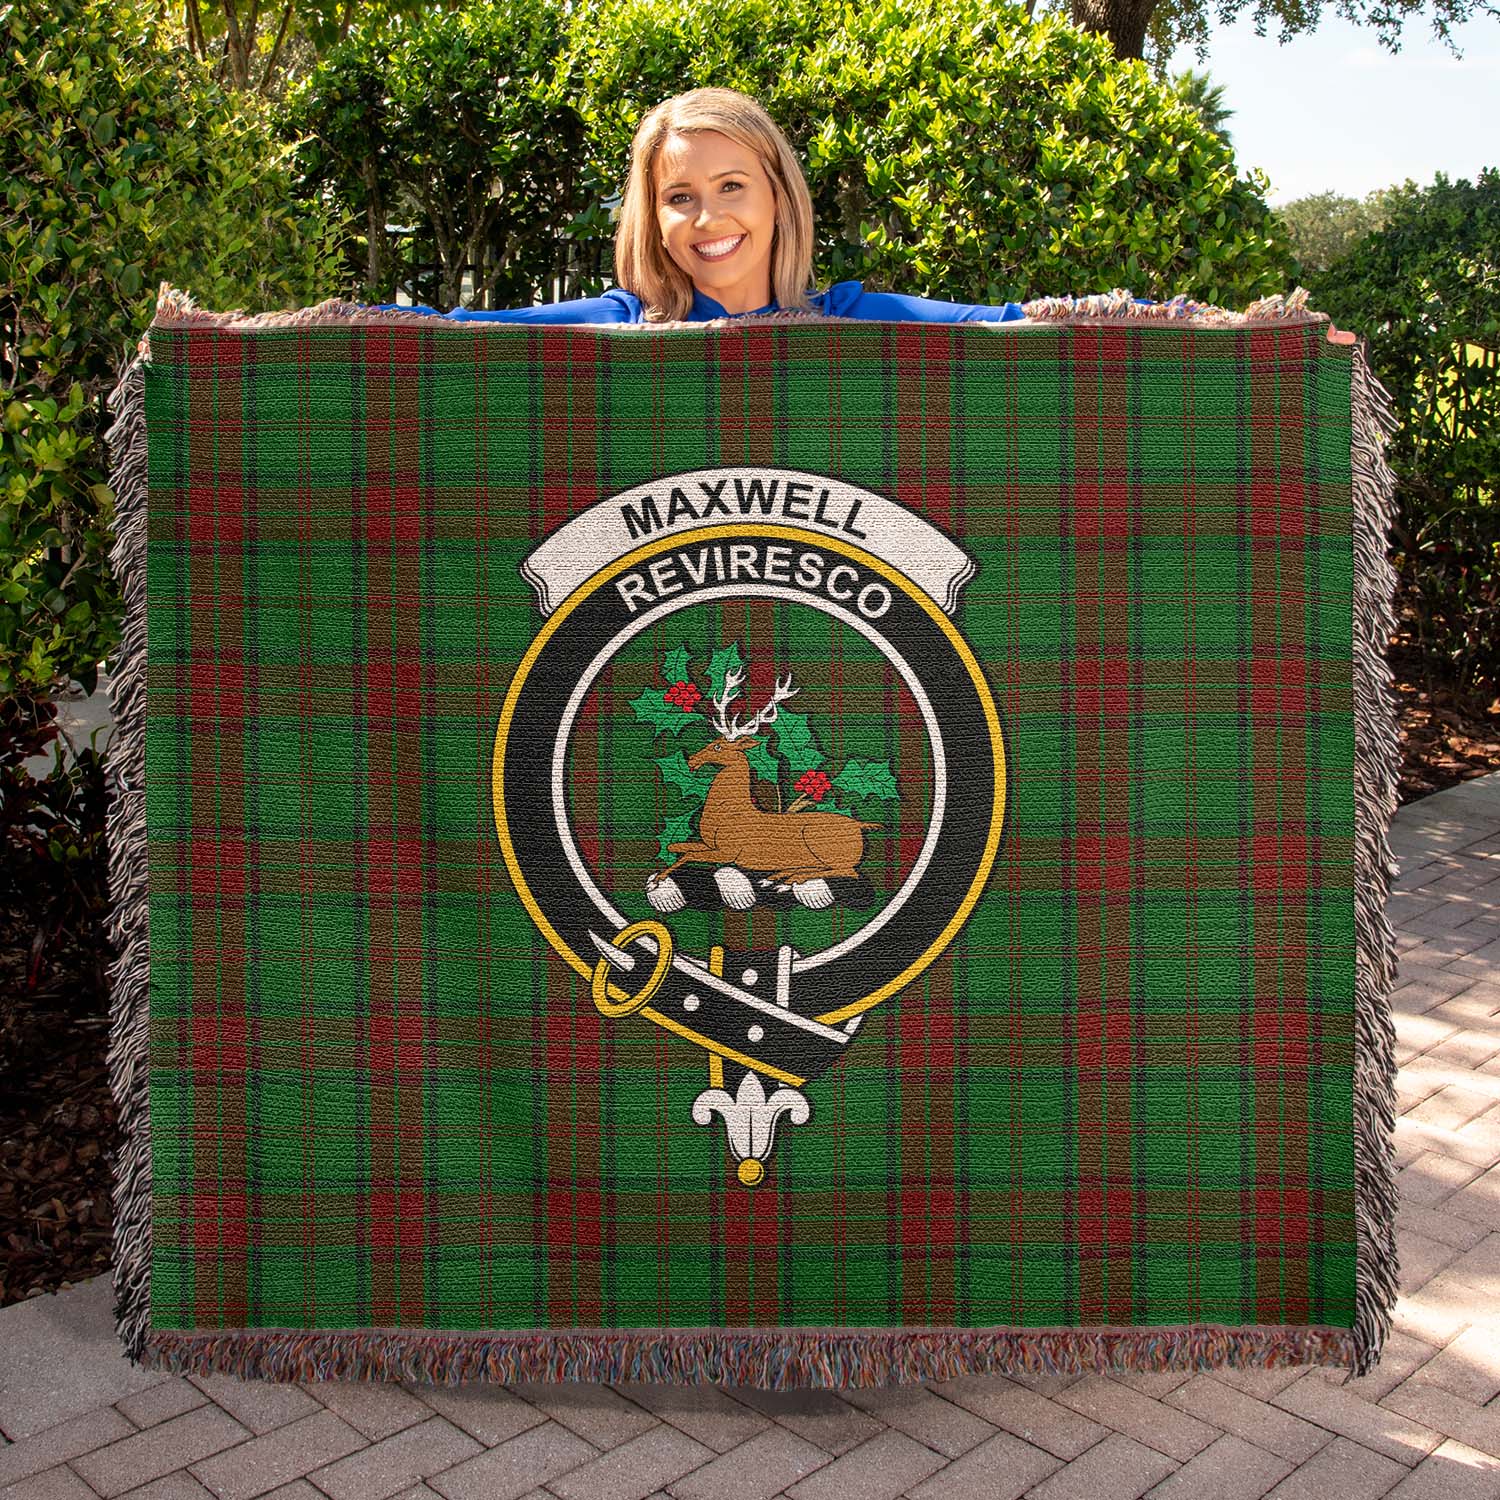 Tartan Vibes Clothing Maxwell Hunting Tartan Woven Blanket with Family Crest